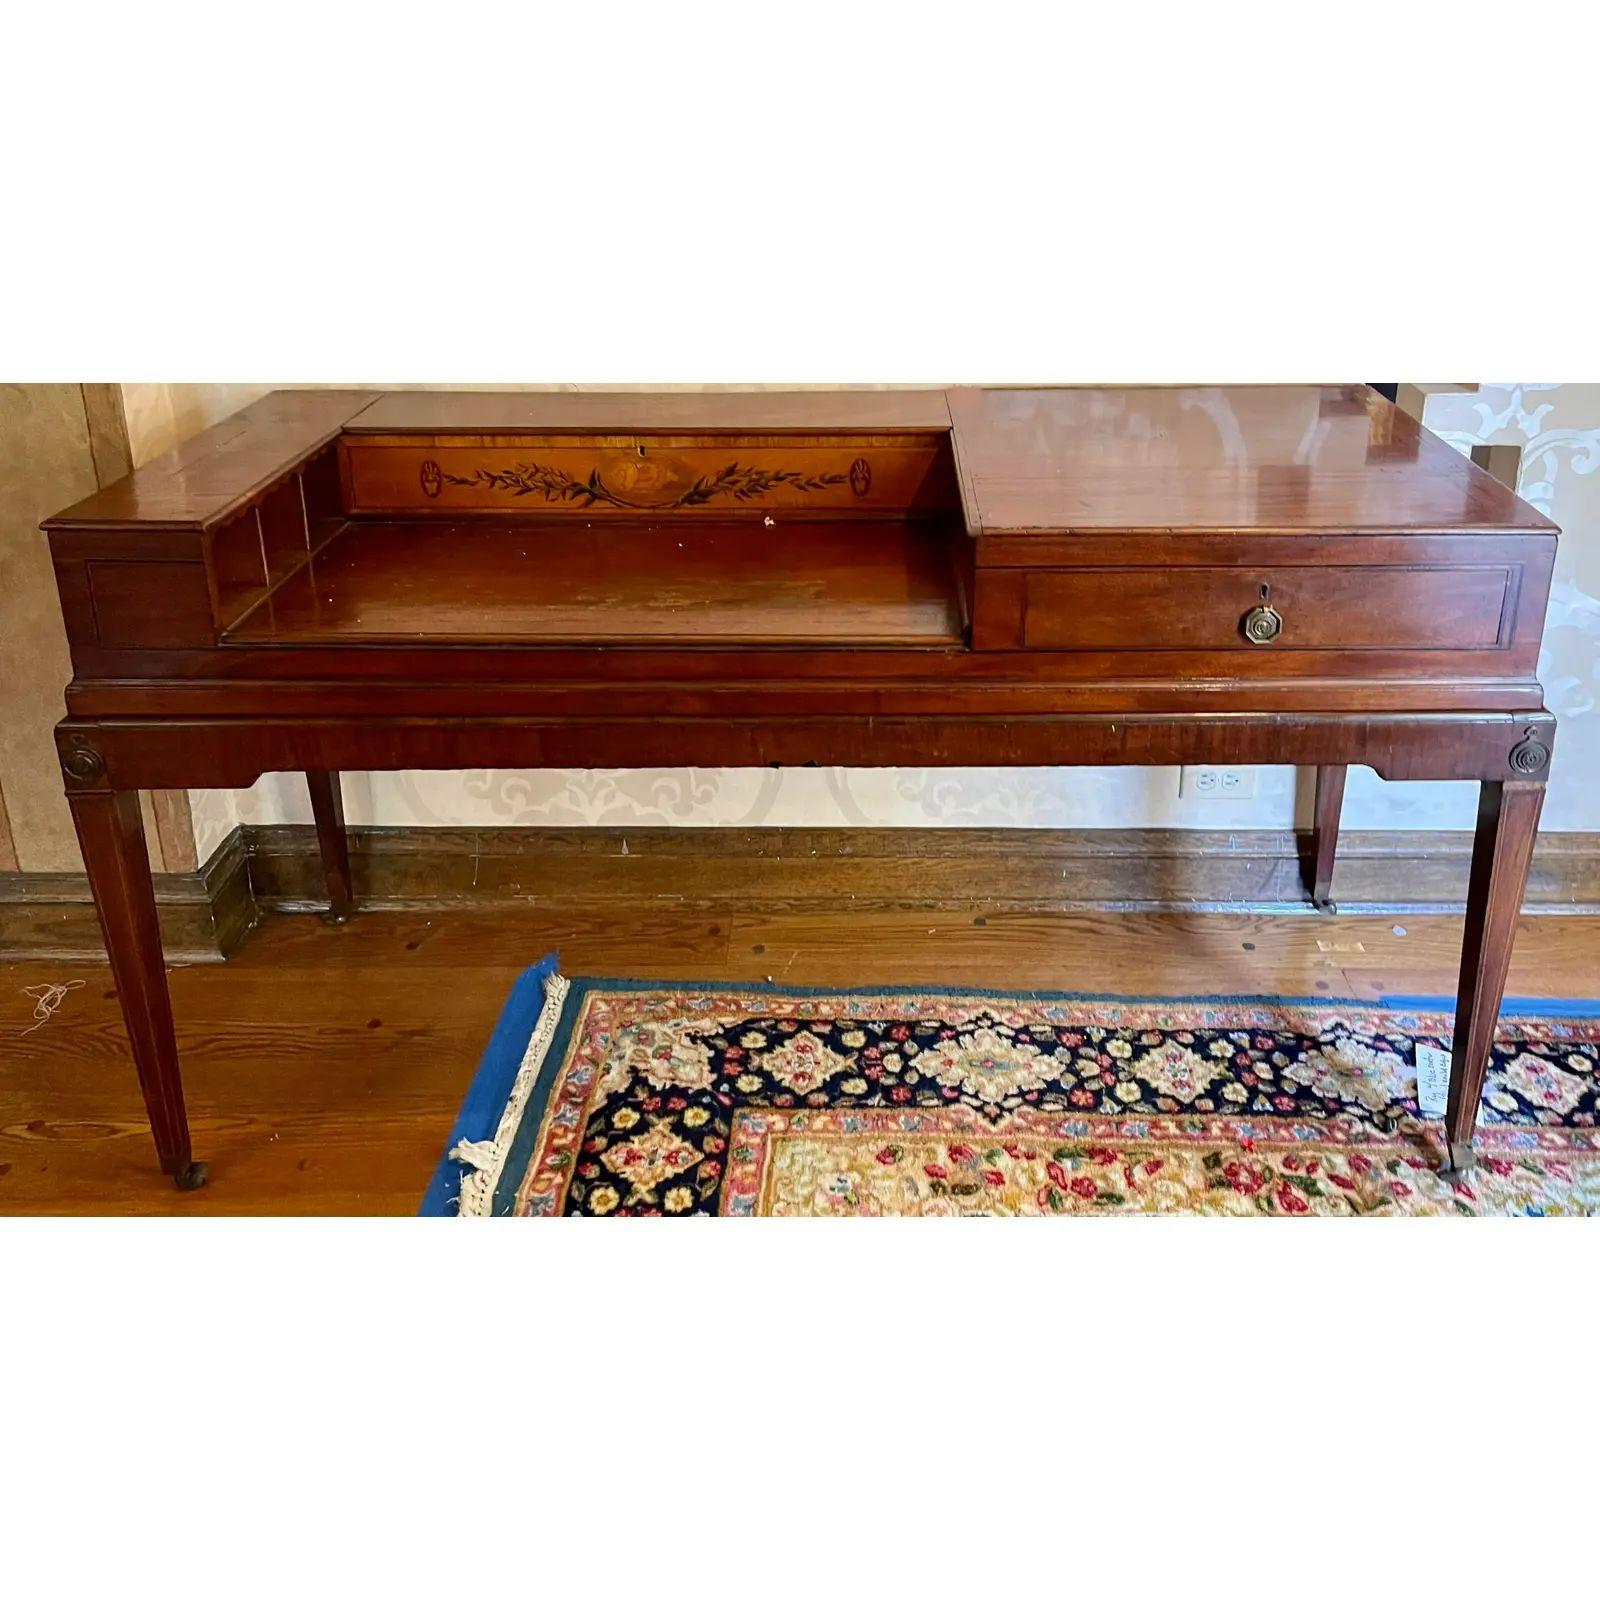 Antique 19th century Mahogany Adams Style Regency writing table desk.

Additional information: 
Materials: Mahogany
Please note that this item contains materials that are legally subject to a special export process that may extend the delivery